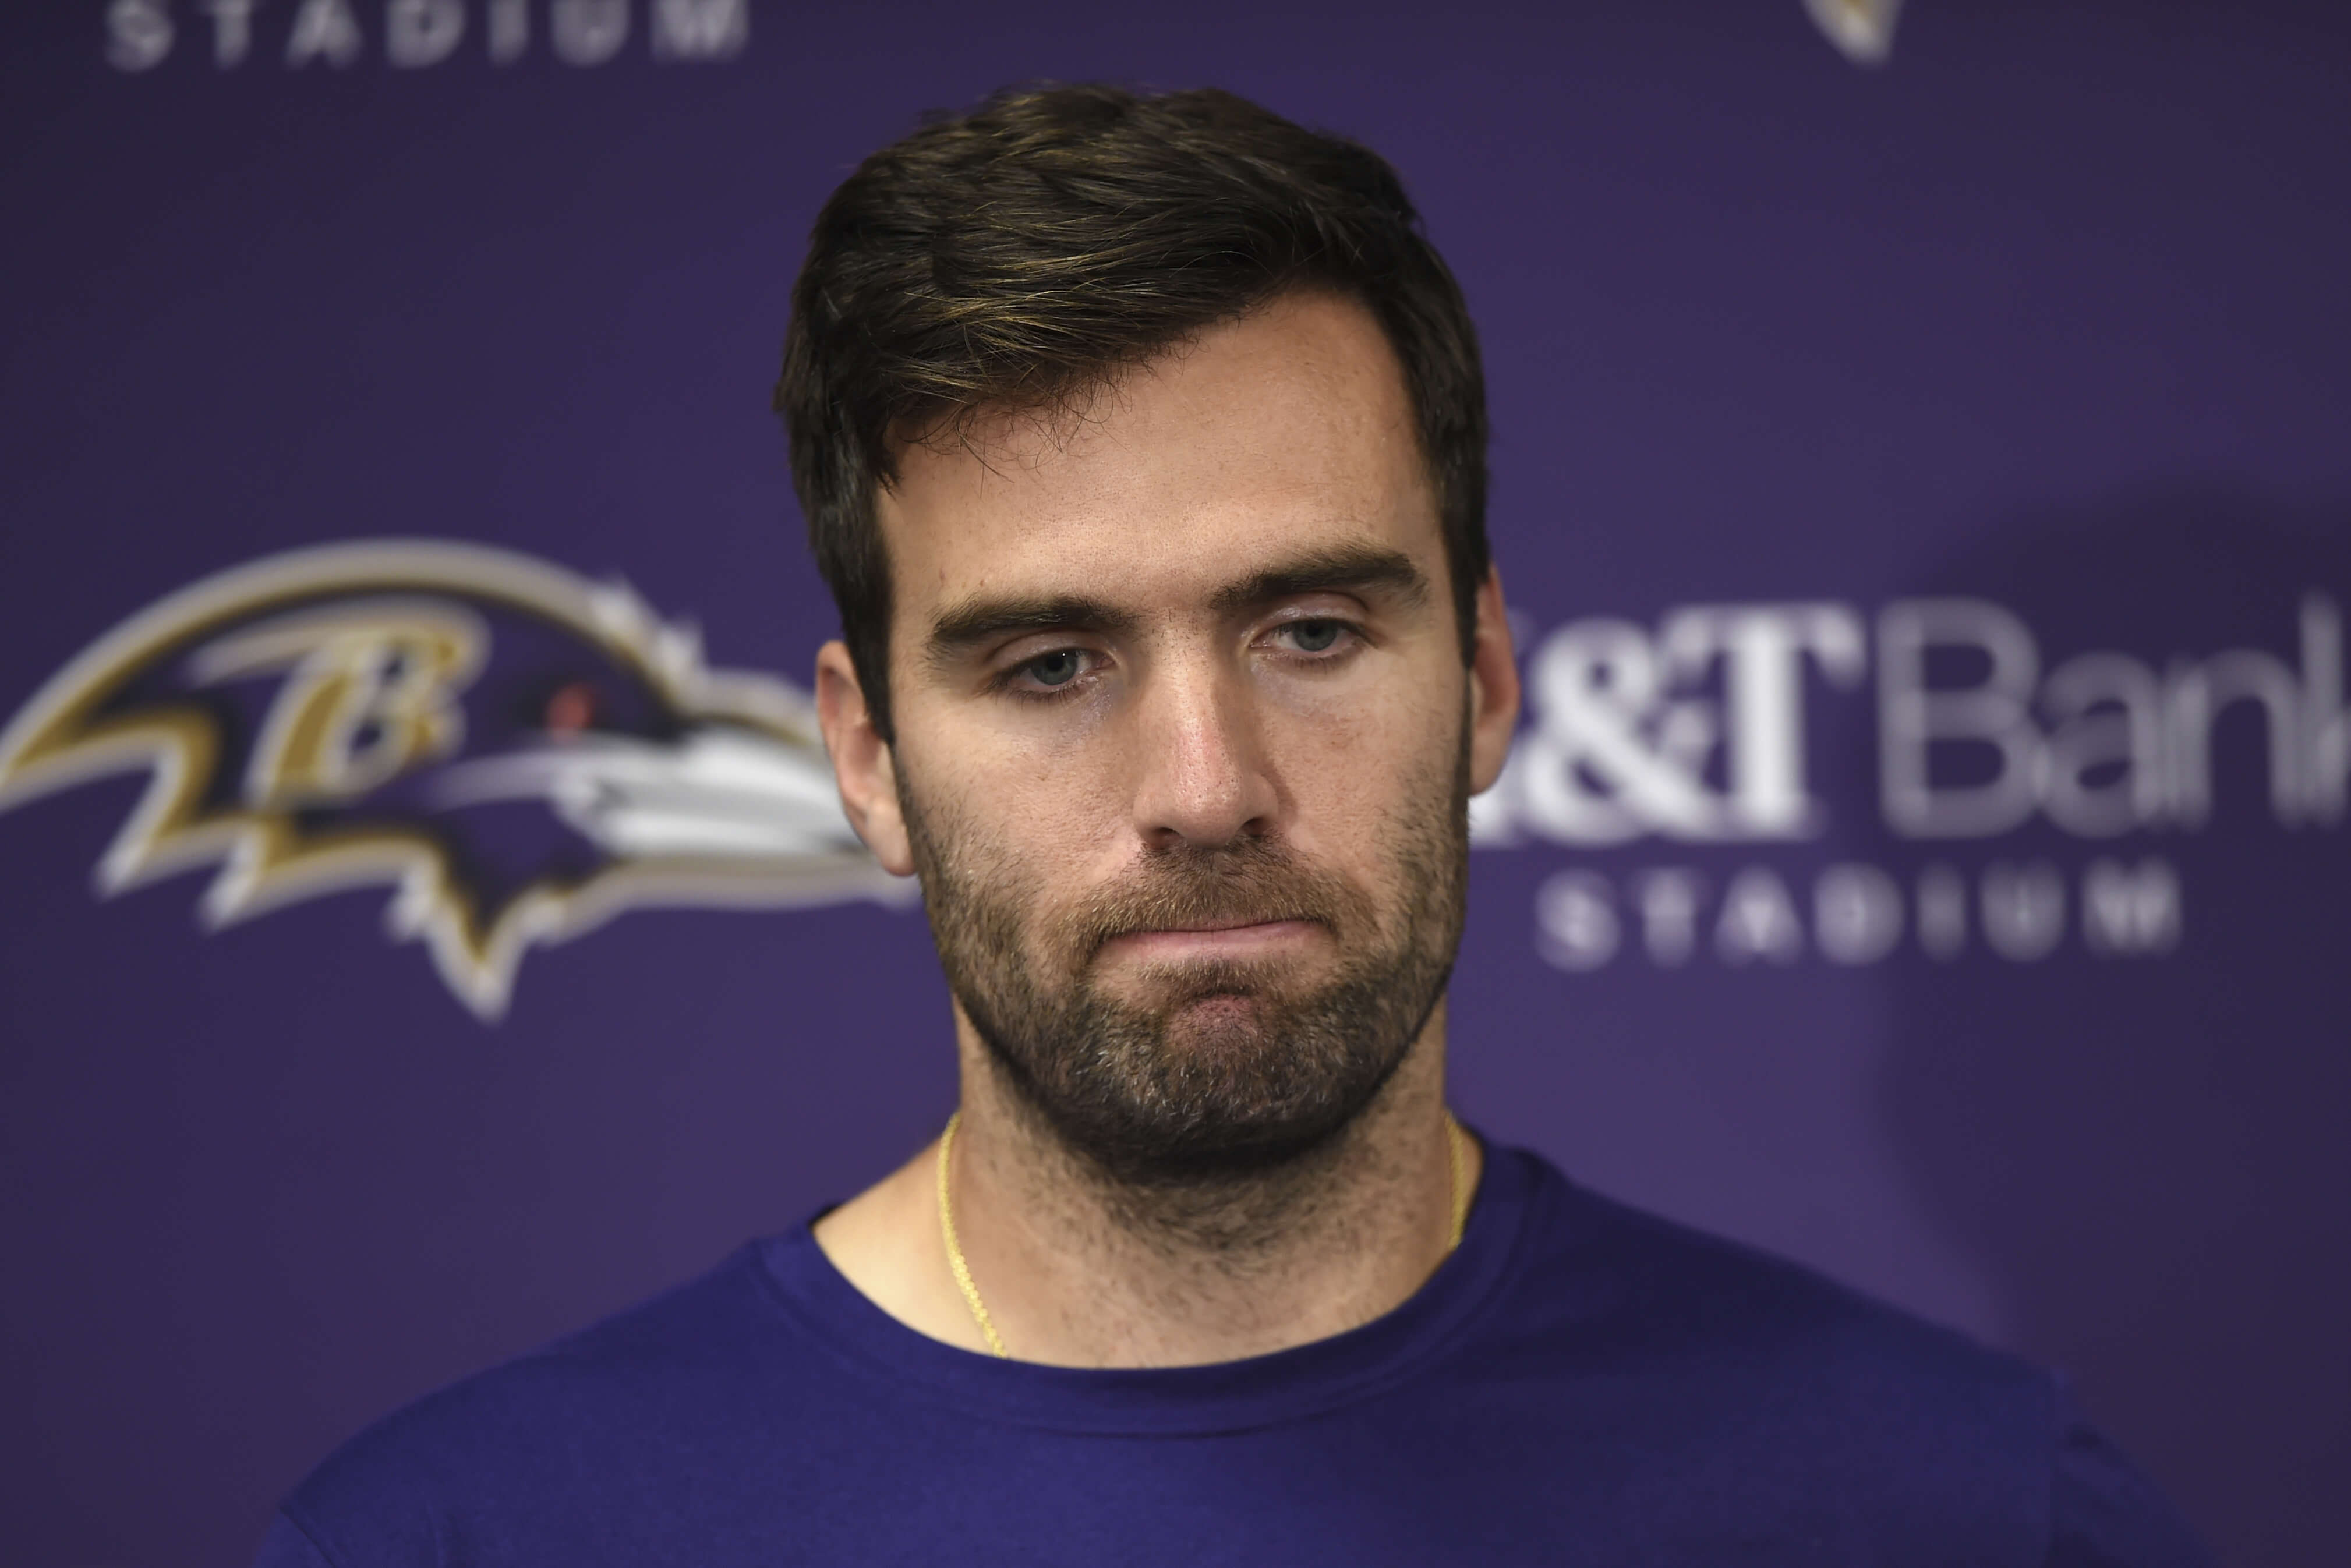 Baltimore Ravens quarterback Joe Flacco speaks at a news conference Nov. 4. Flacco has lost his starting job and will be the backup Sunday for the first time in his 11-year NFL career.